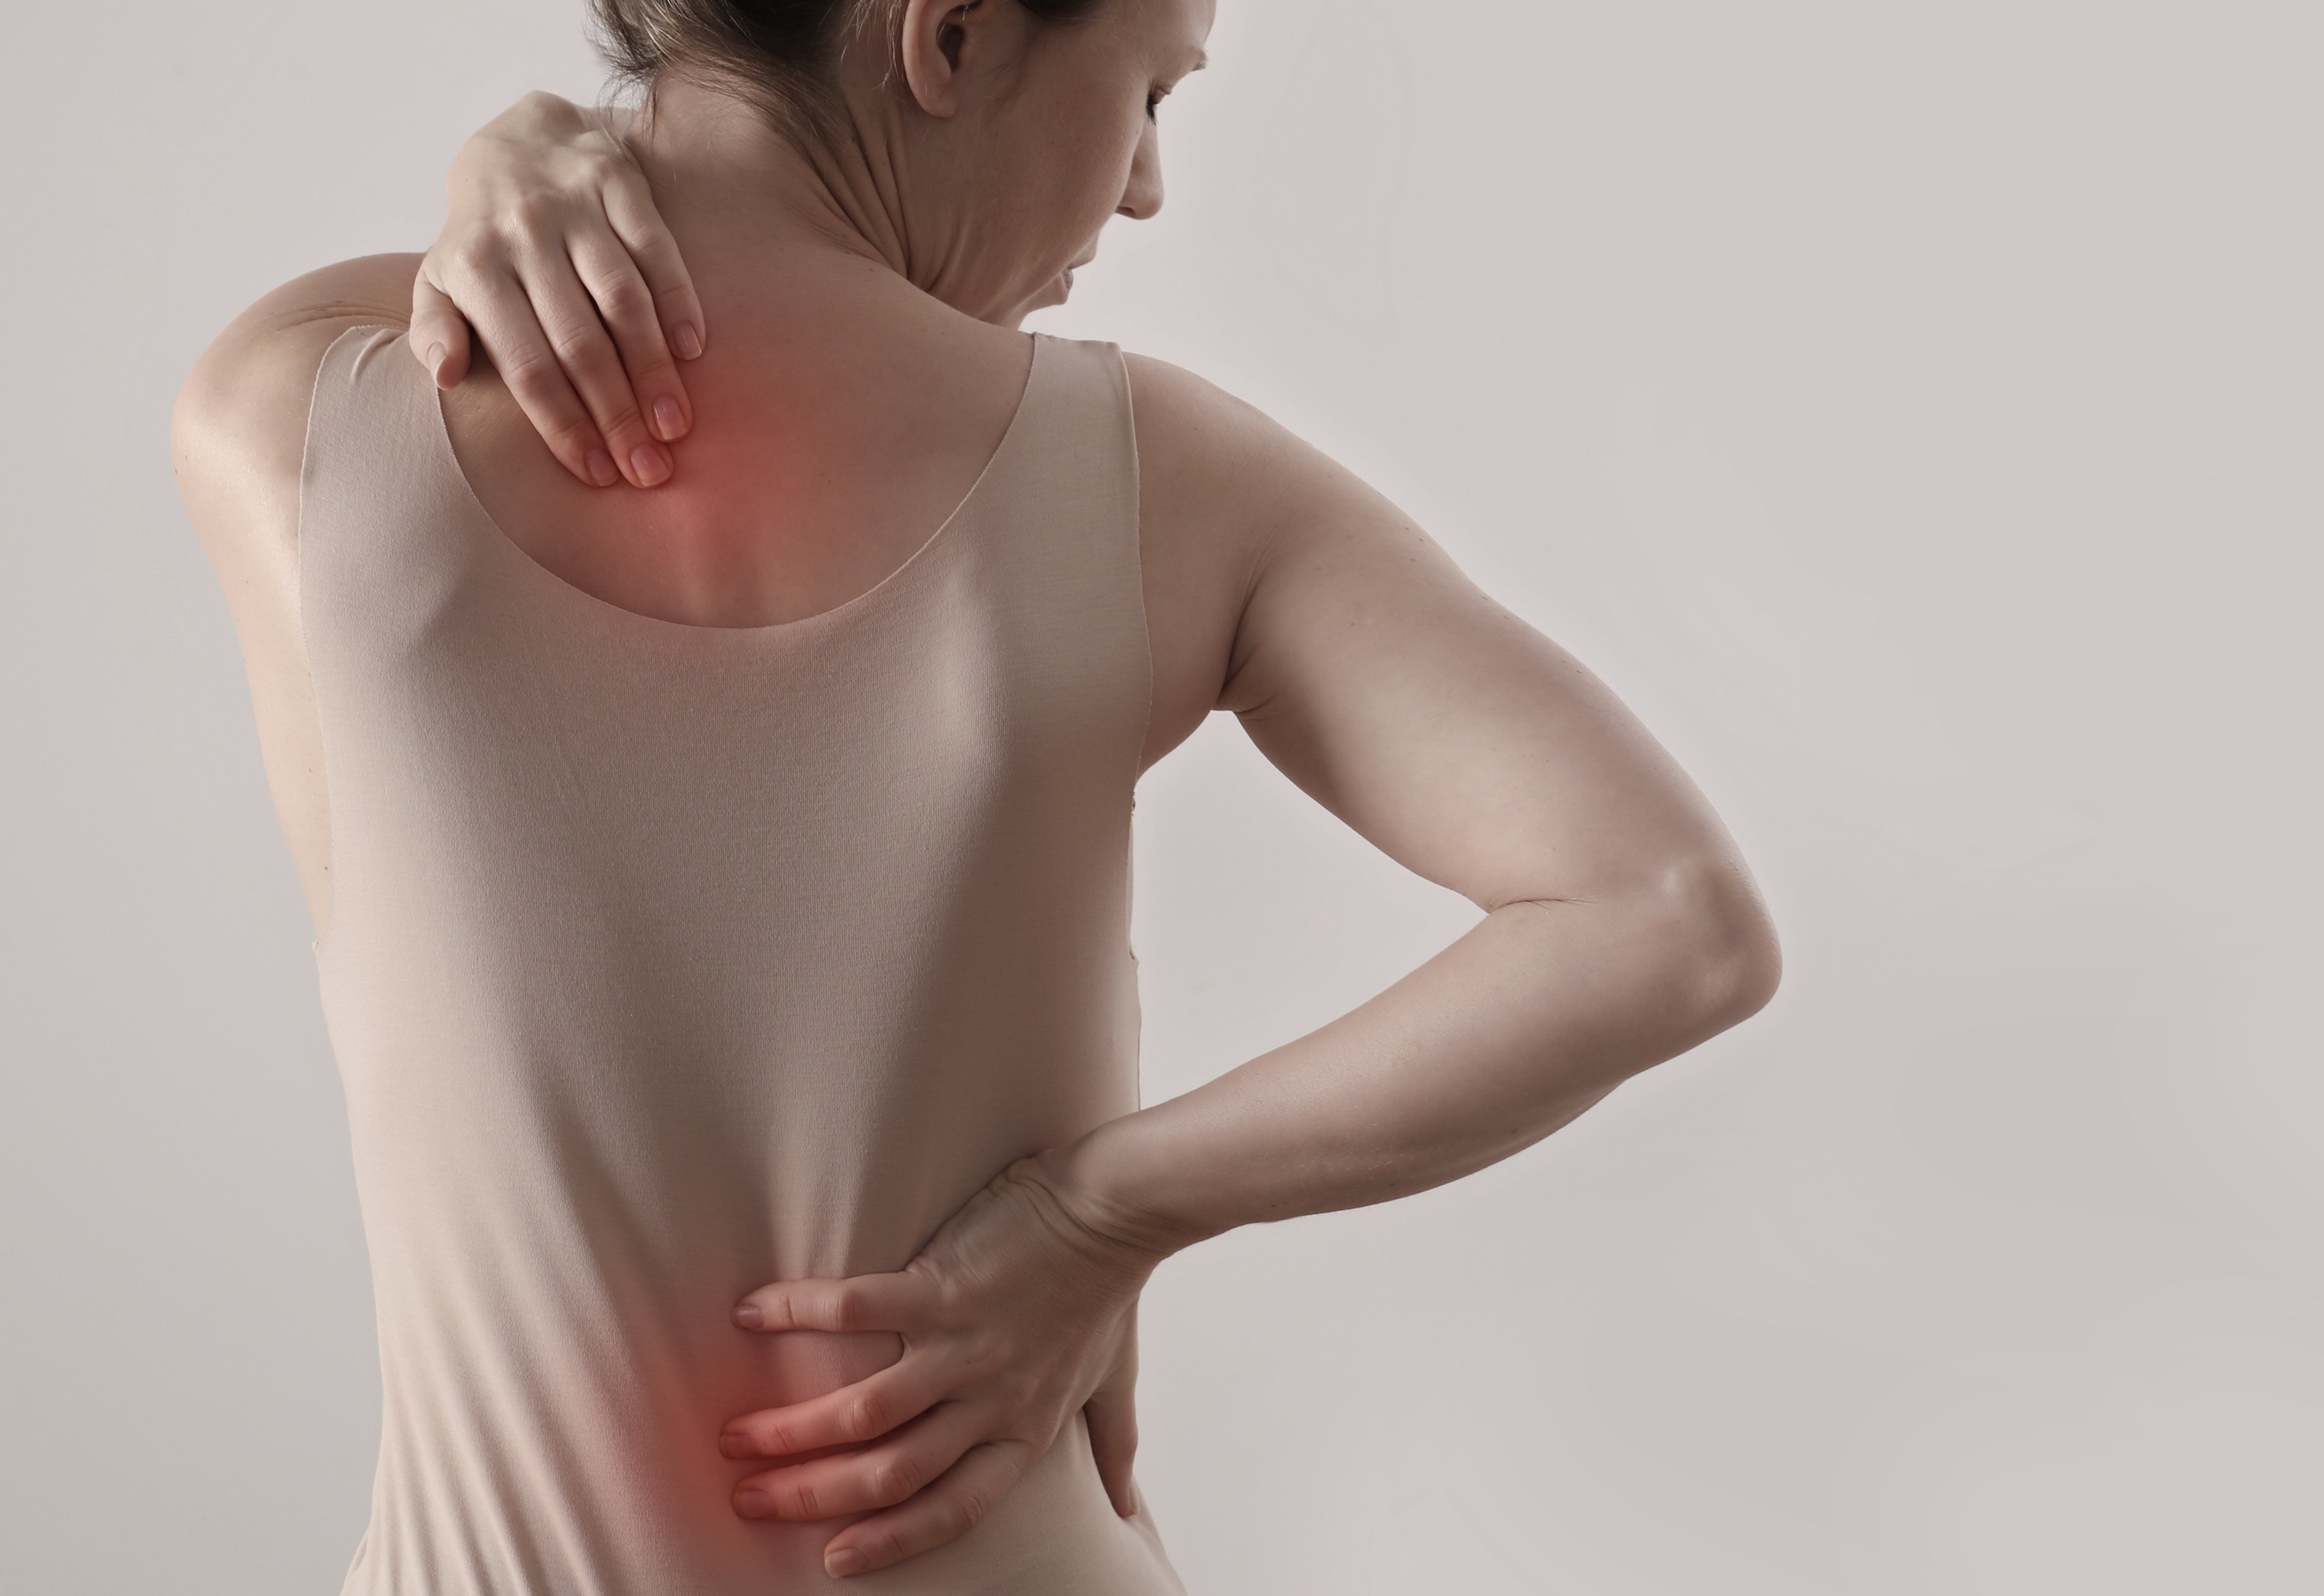 How Chiropractors Use Traction Therapy for Back Pain